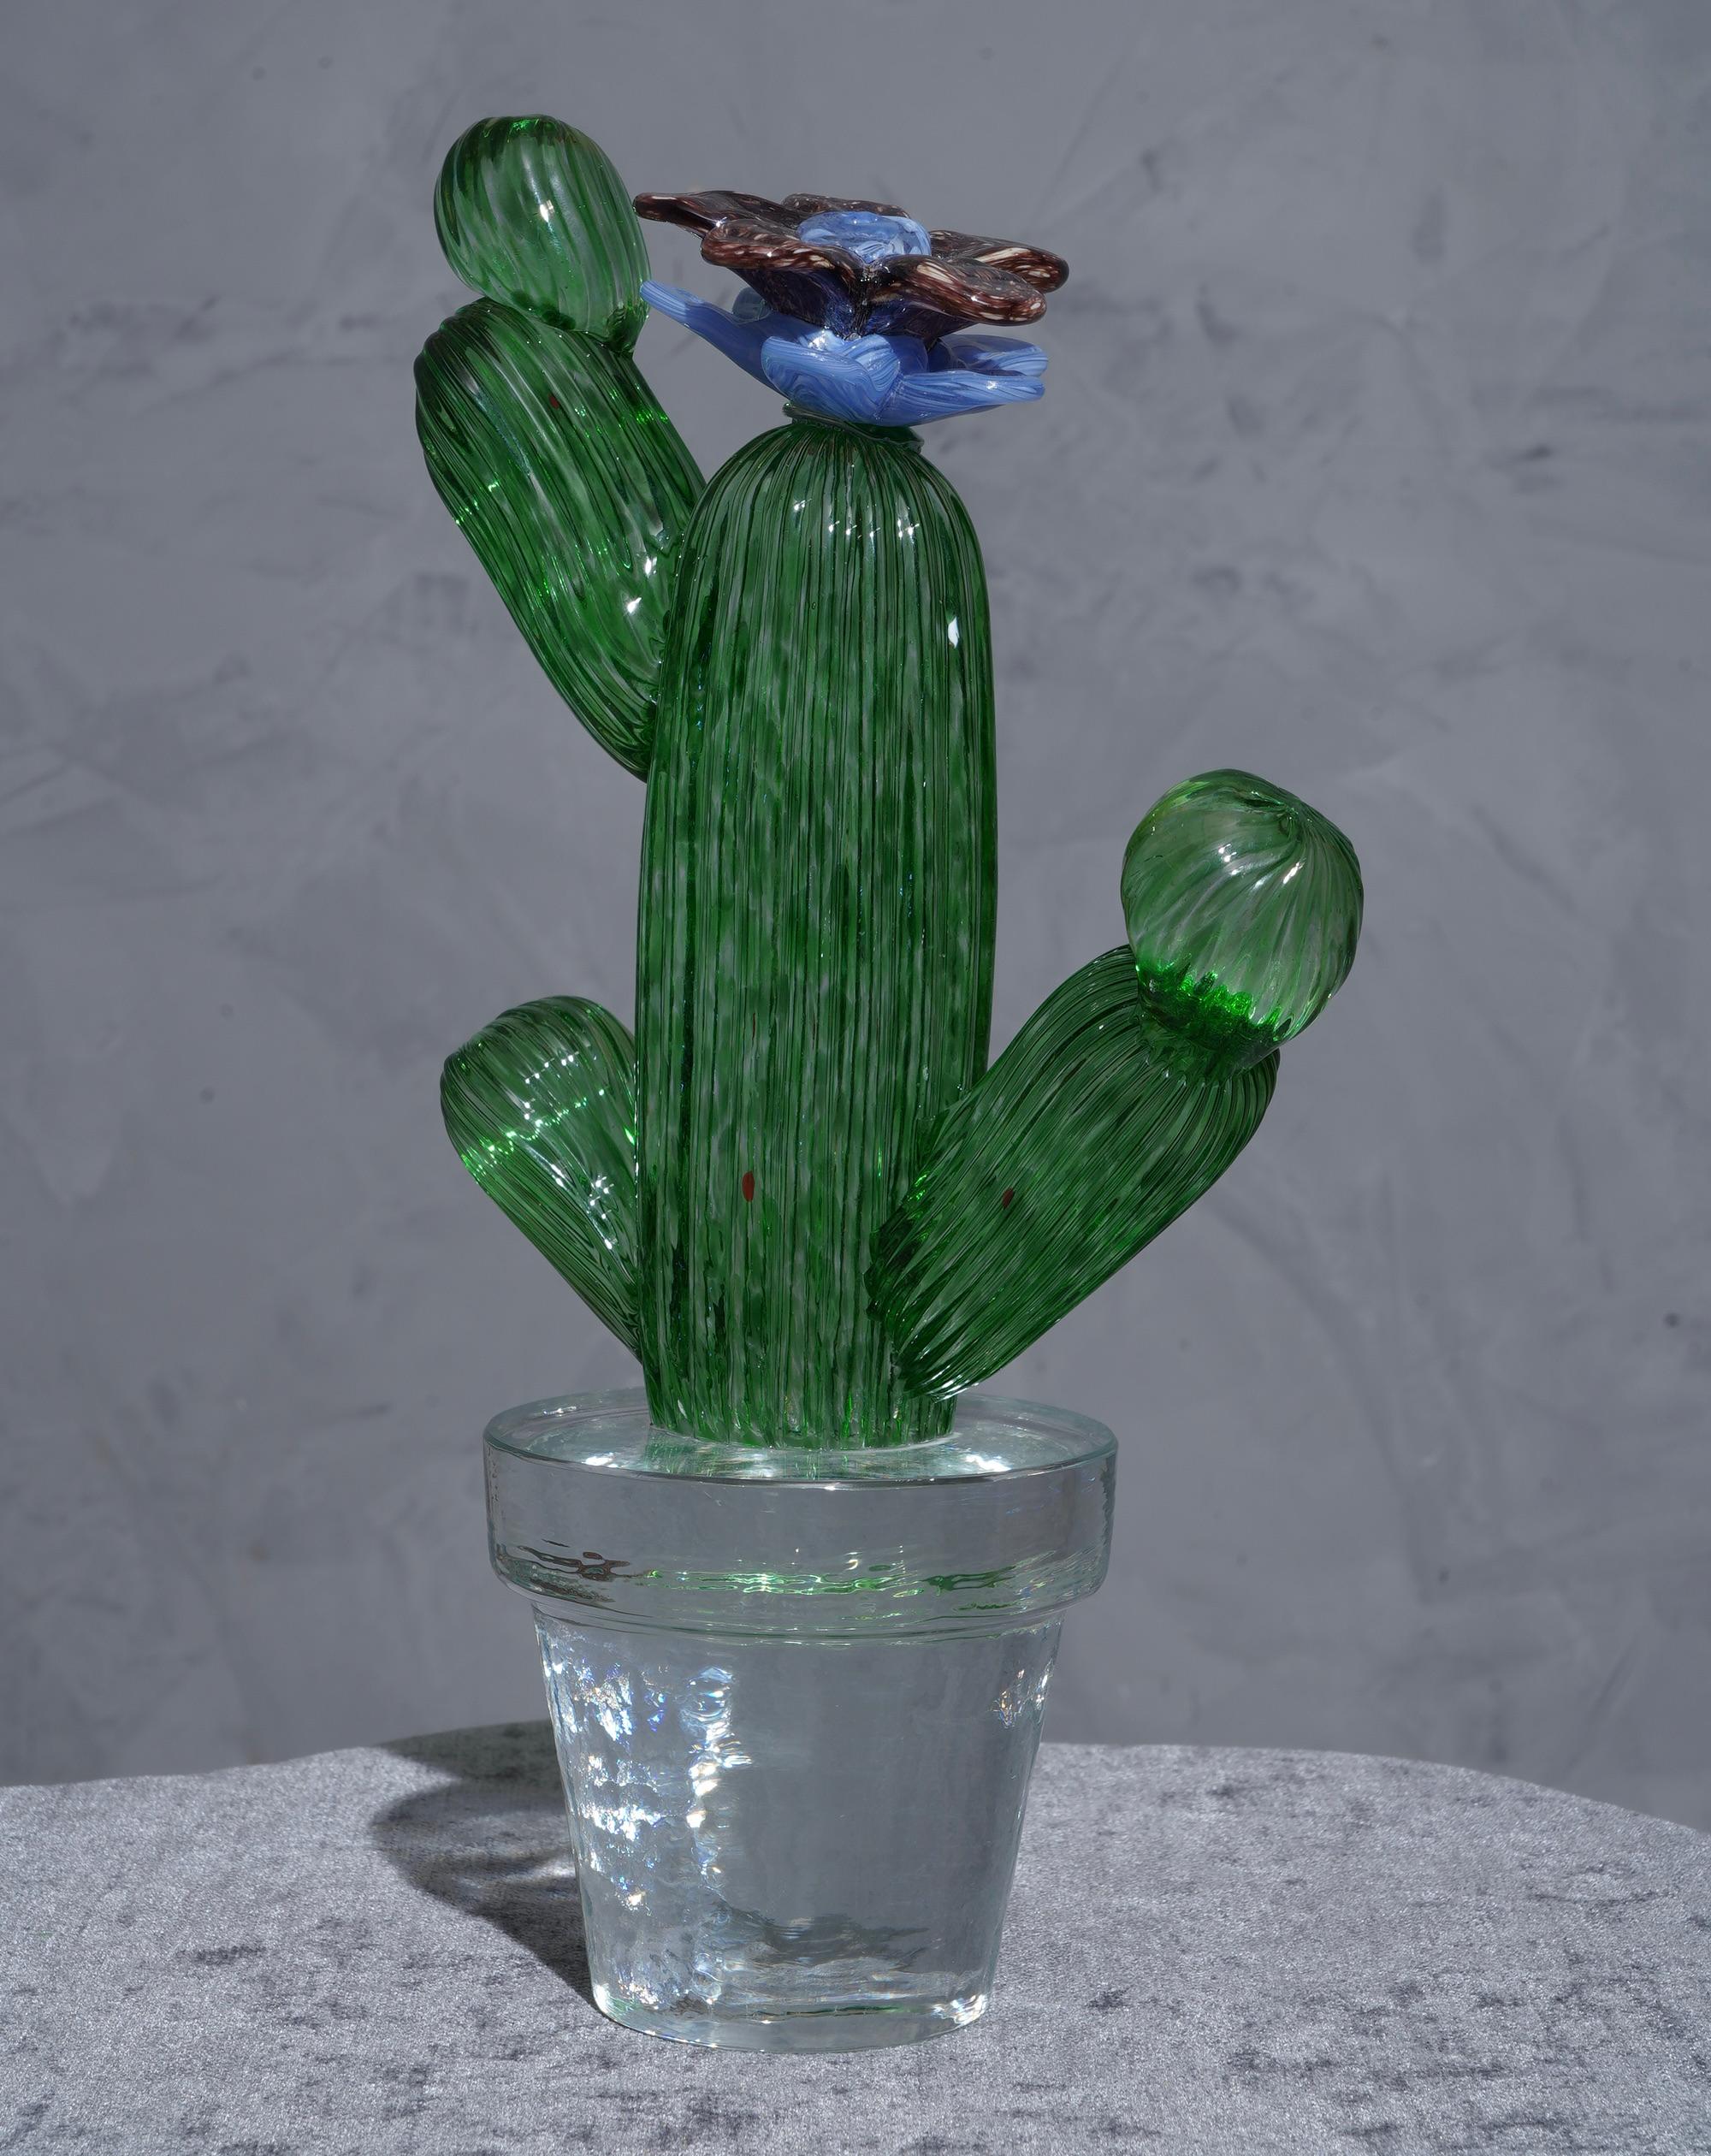 Italian design by Marta Marzotto creator of style, this cactus is a fashion icon of the Italian style, emerald green with a blue and black colored spot, the flower.

In limited edition, as can be seen from the writing under the transparent vase